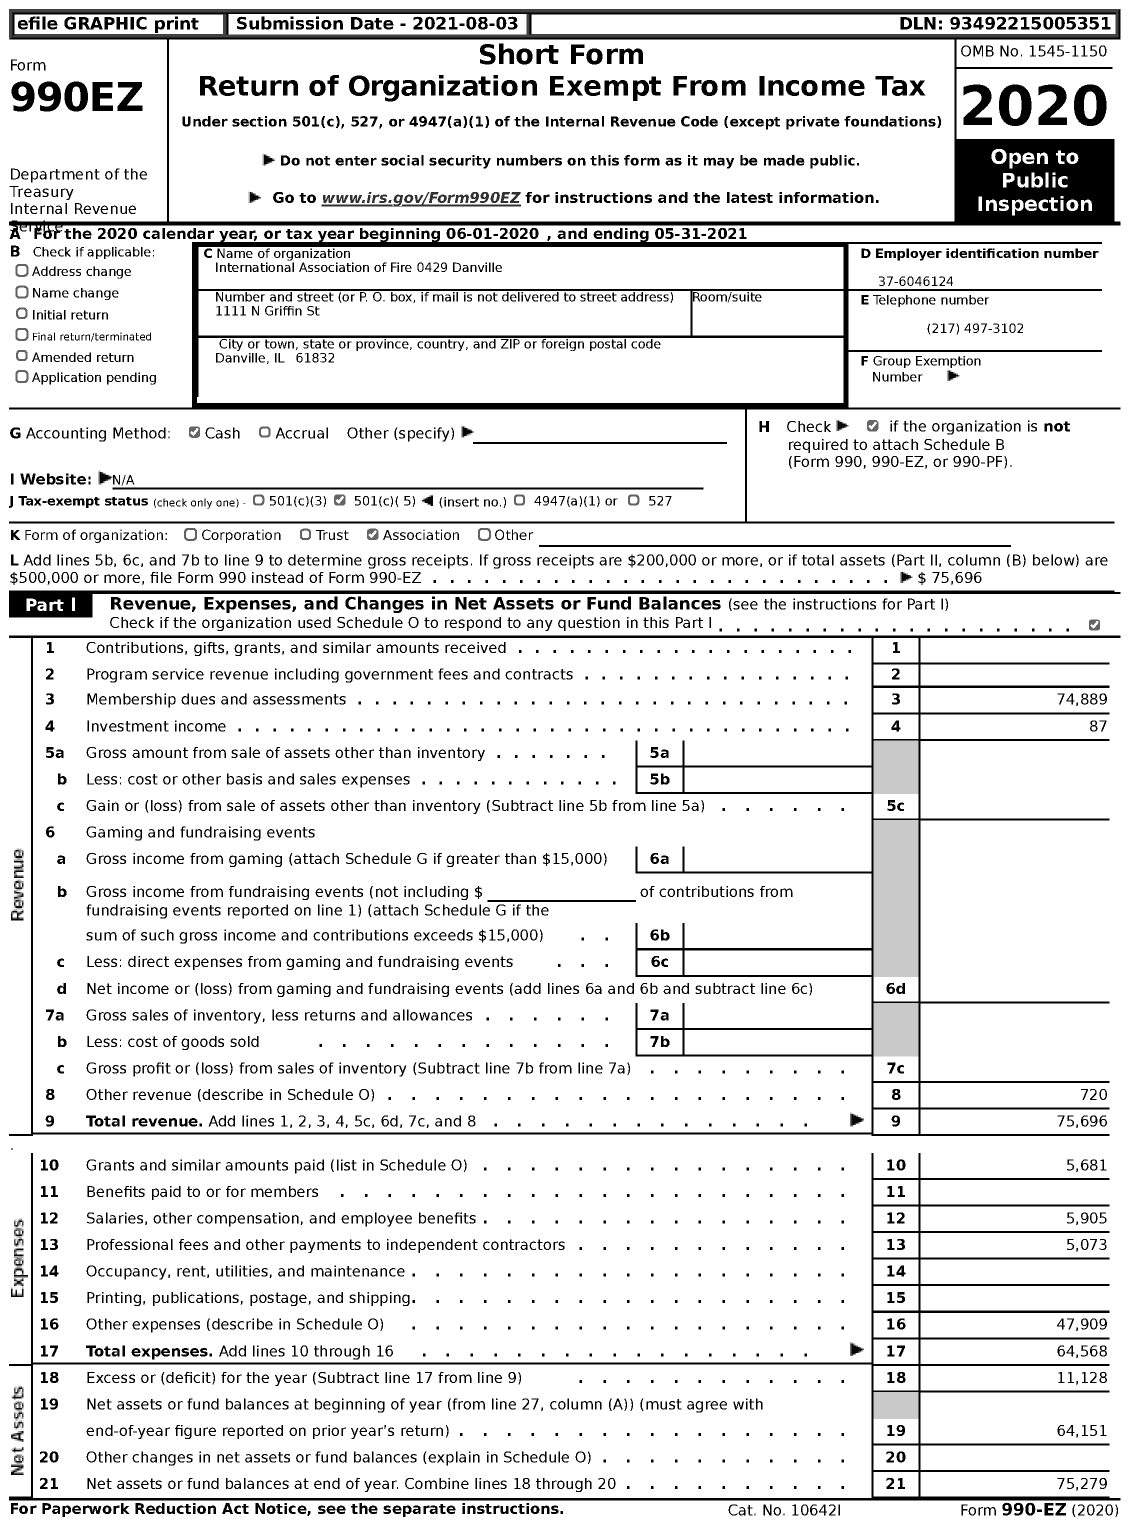 Image of first page of 2020 Form 990EZ for International Association of Fire Fighters - L0429 Danville